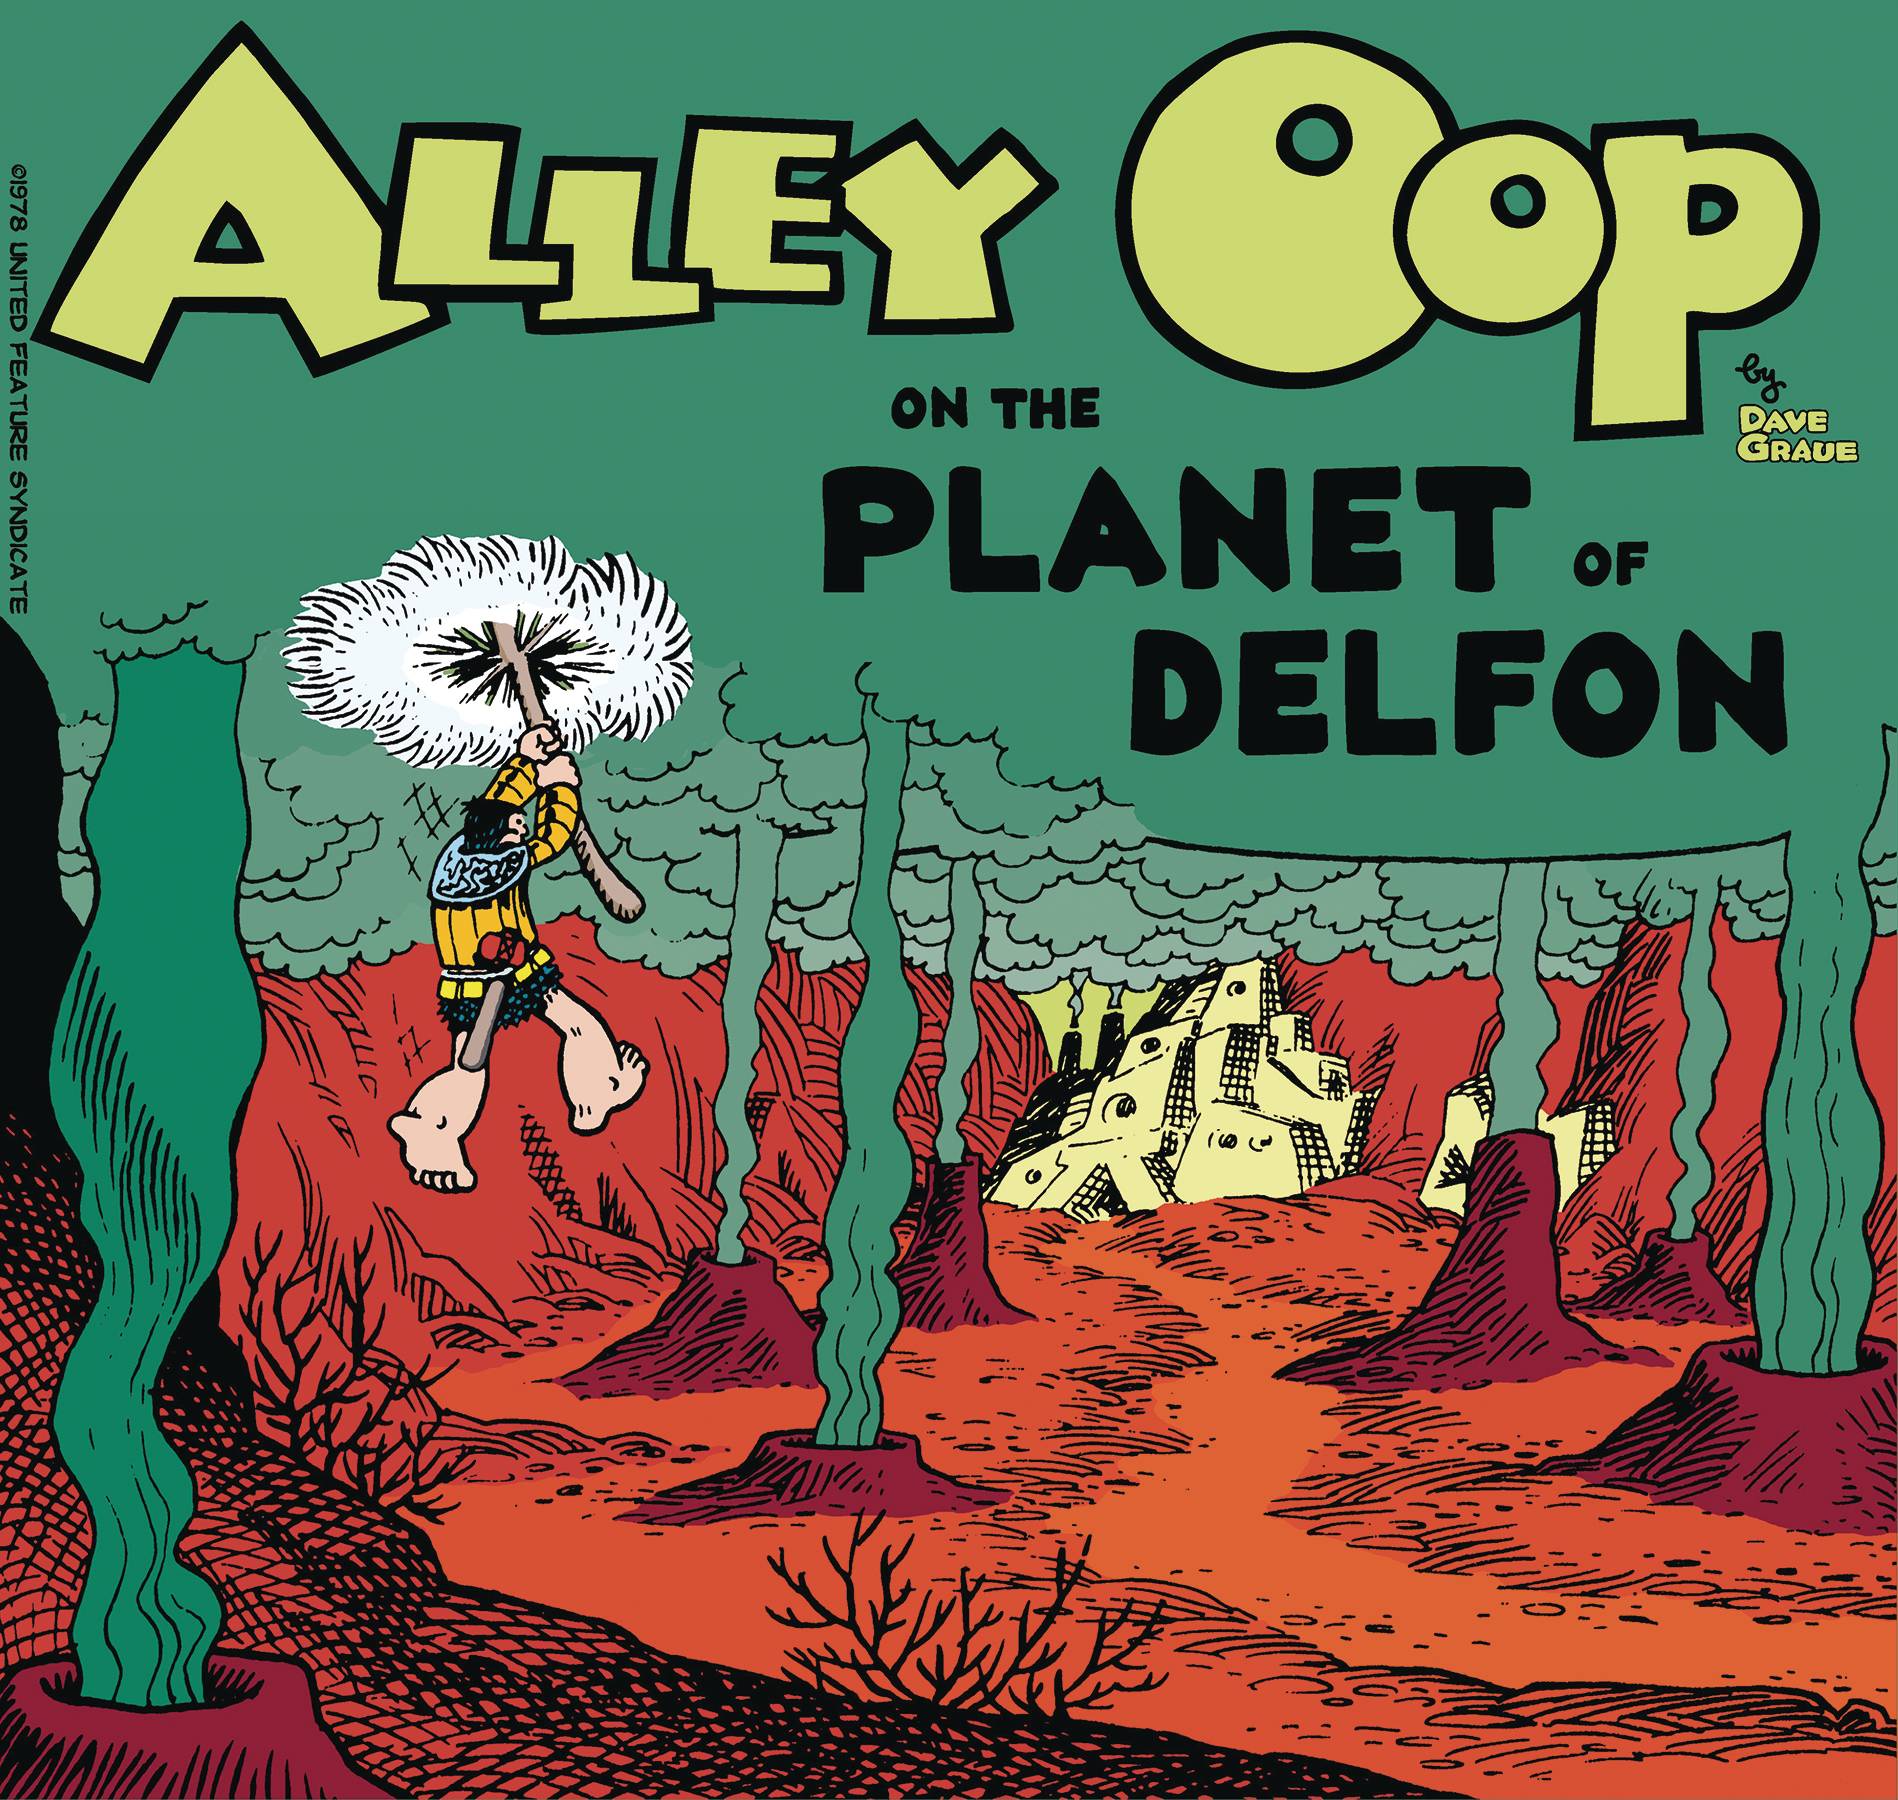 ALLEY OOP ON PLANET OF DELFON #46